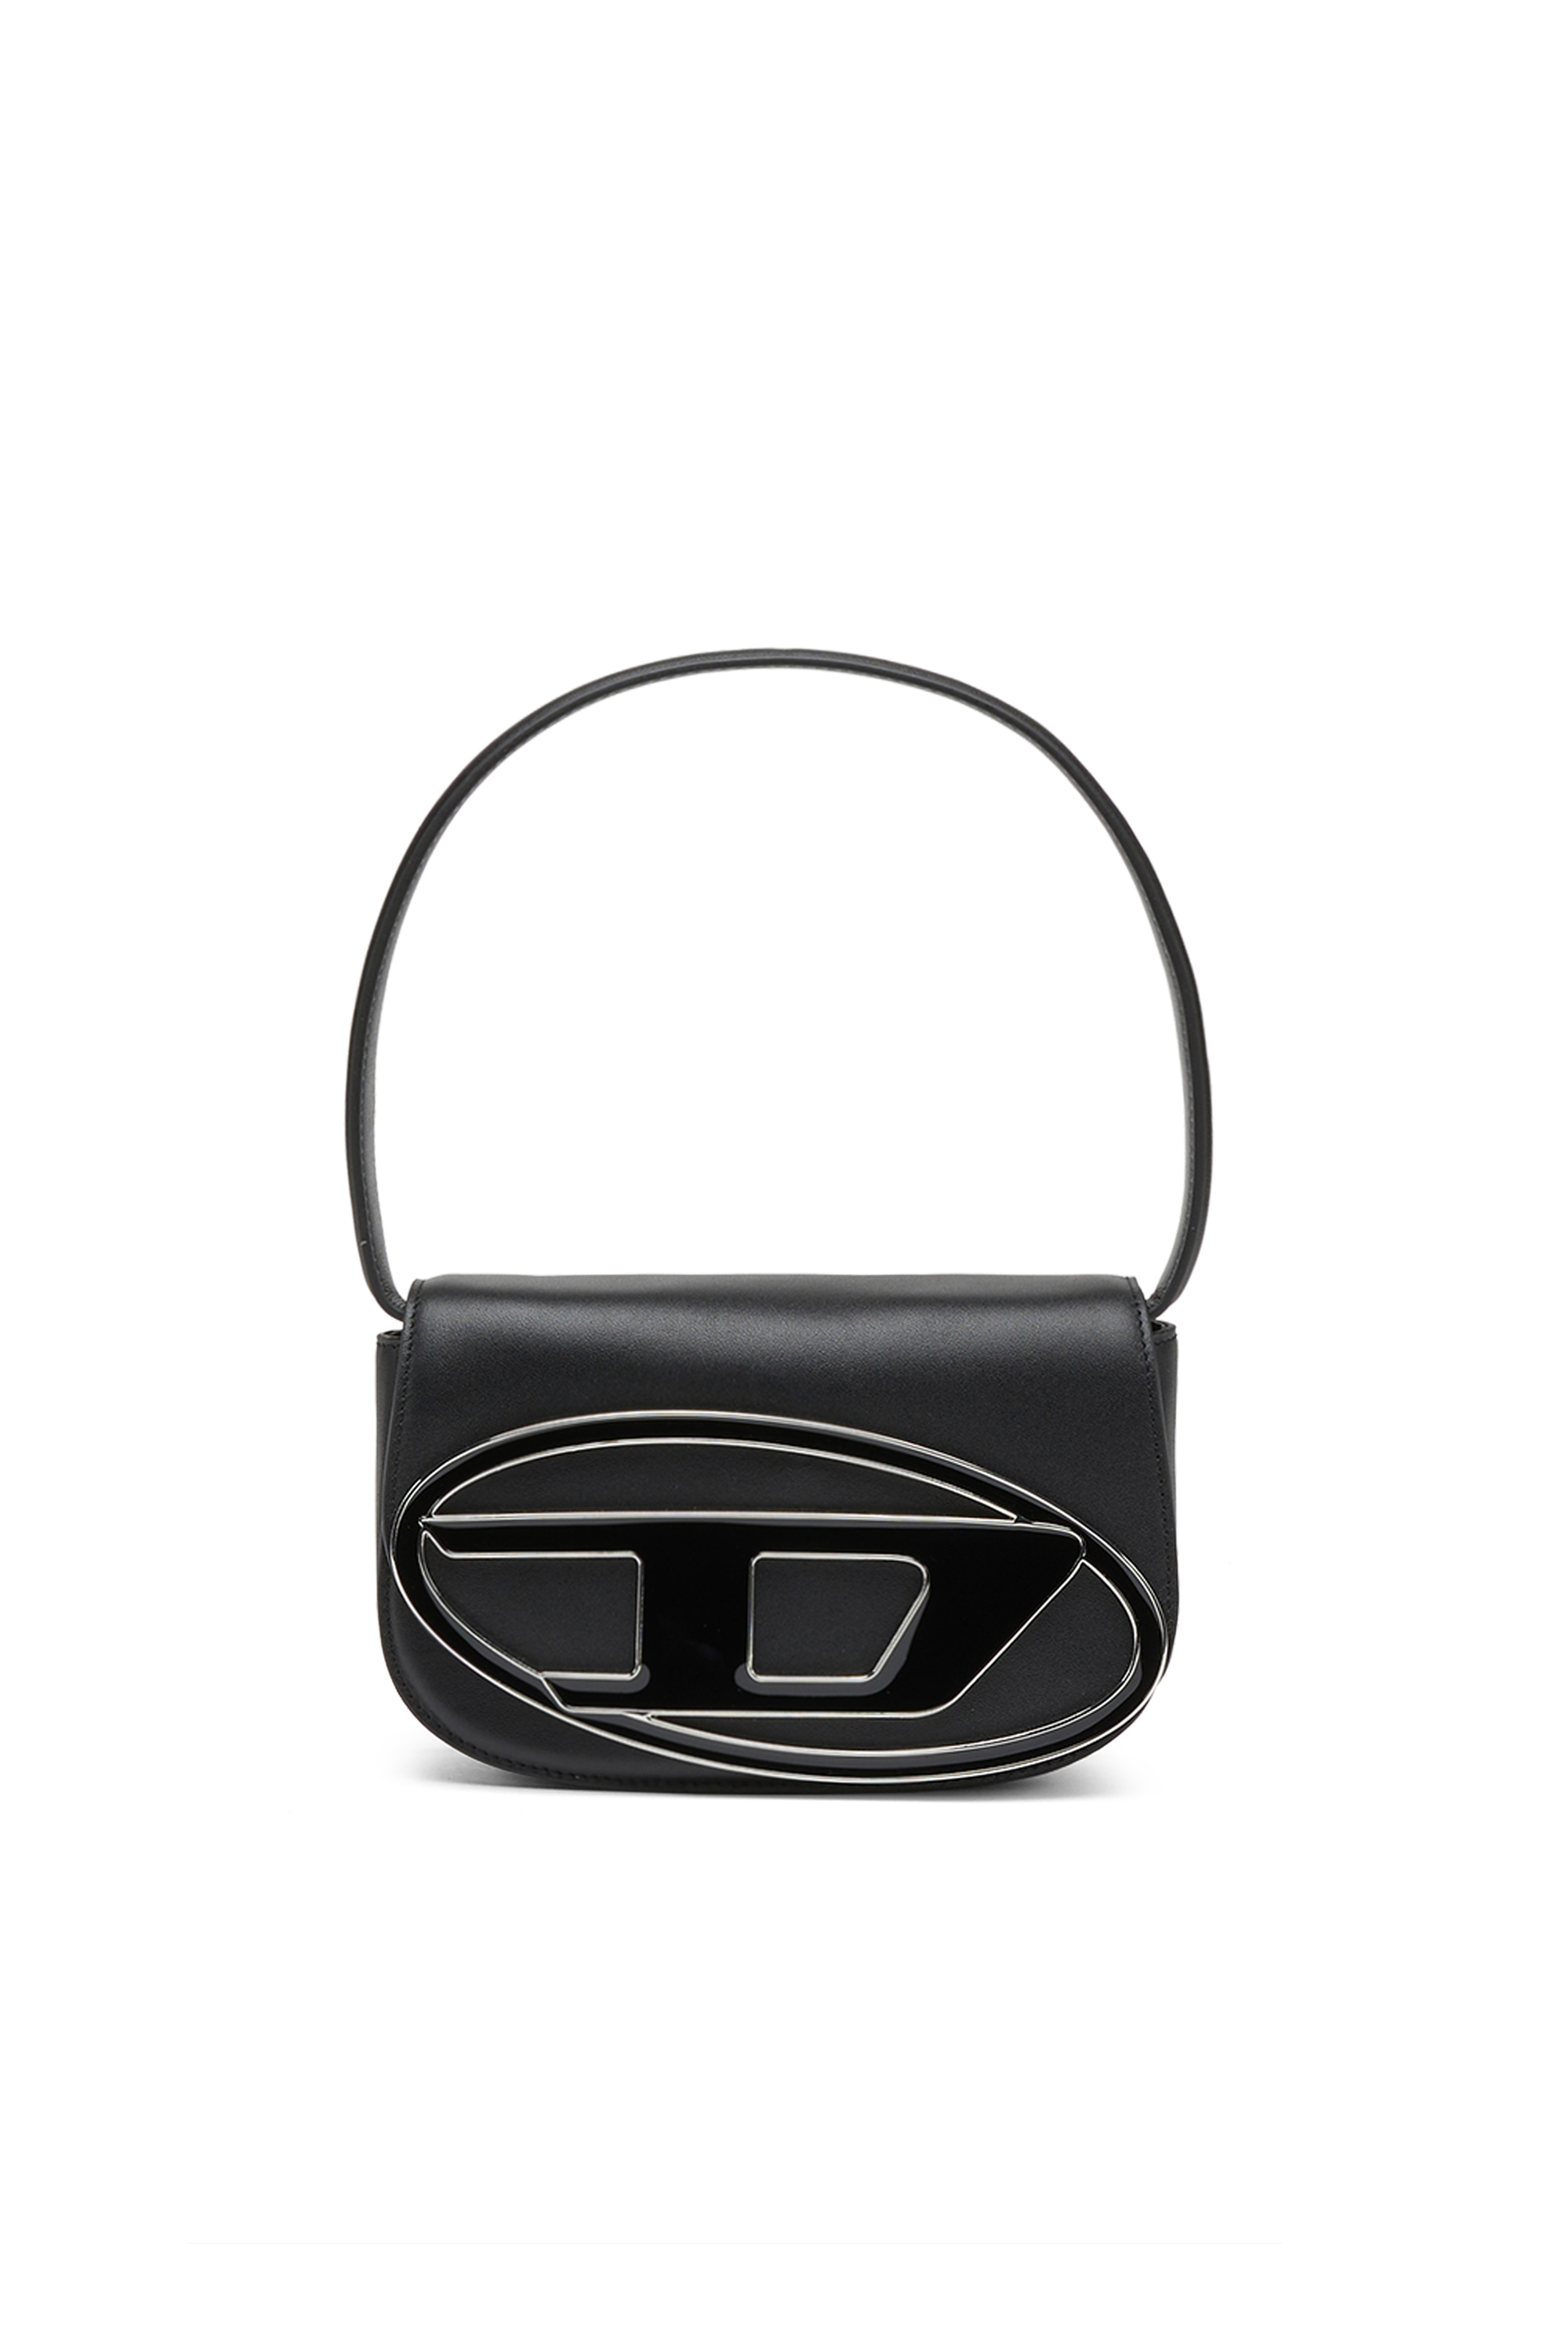 1DR-Iconic shoulder bag in nappa leather